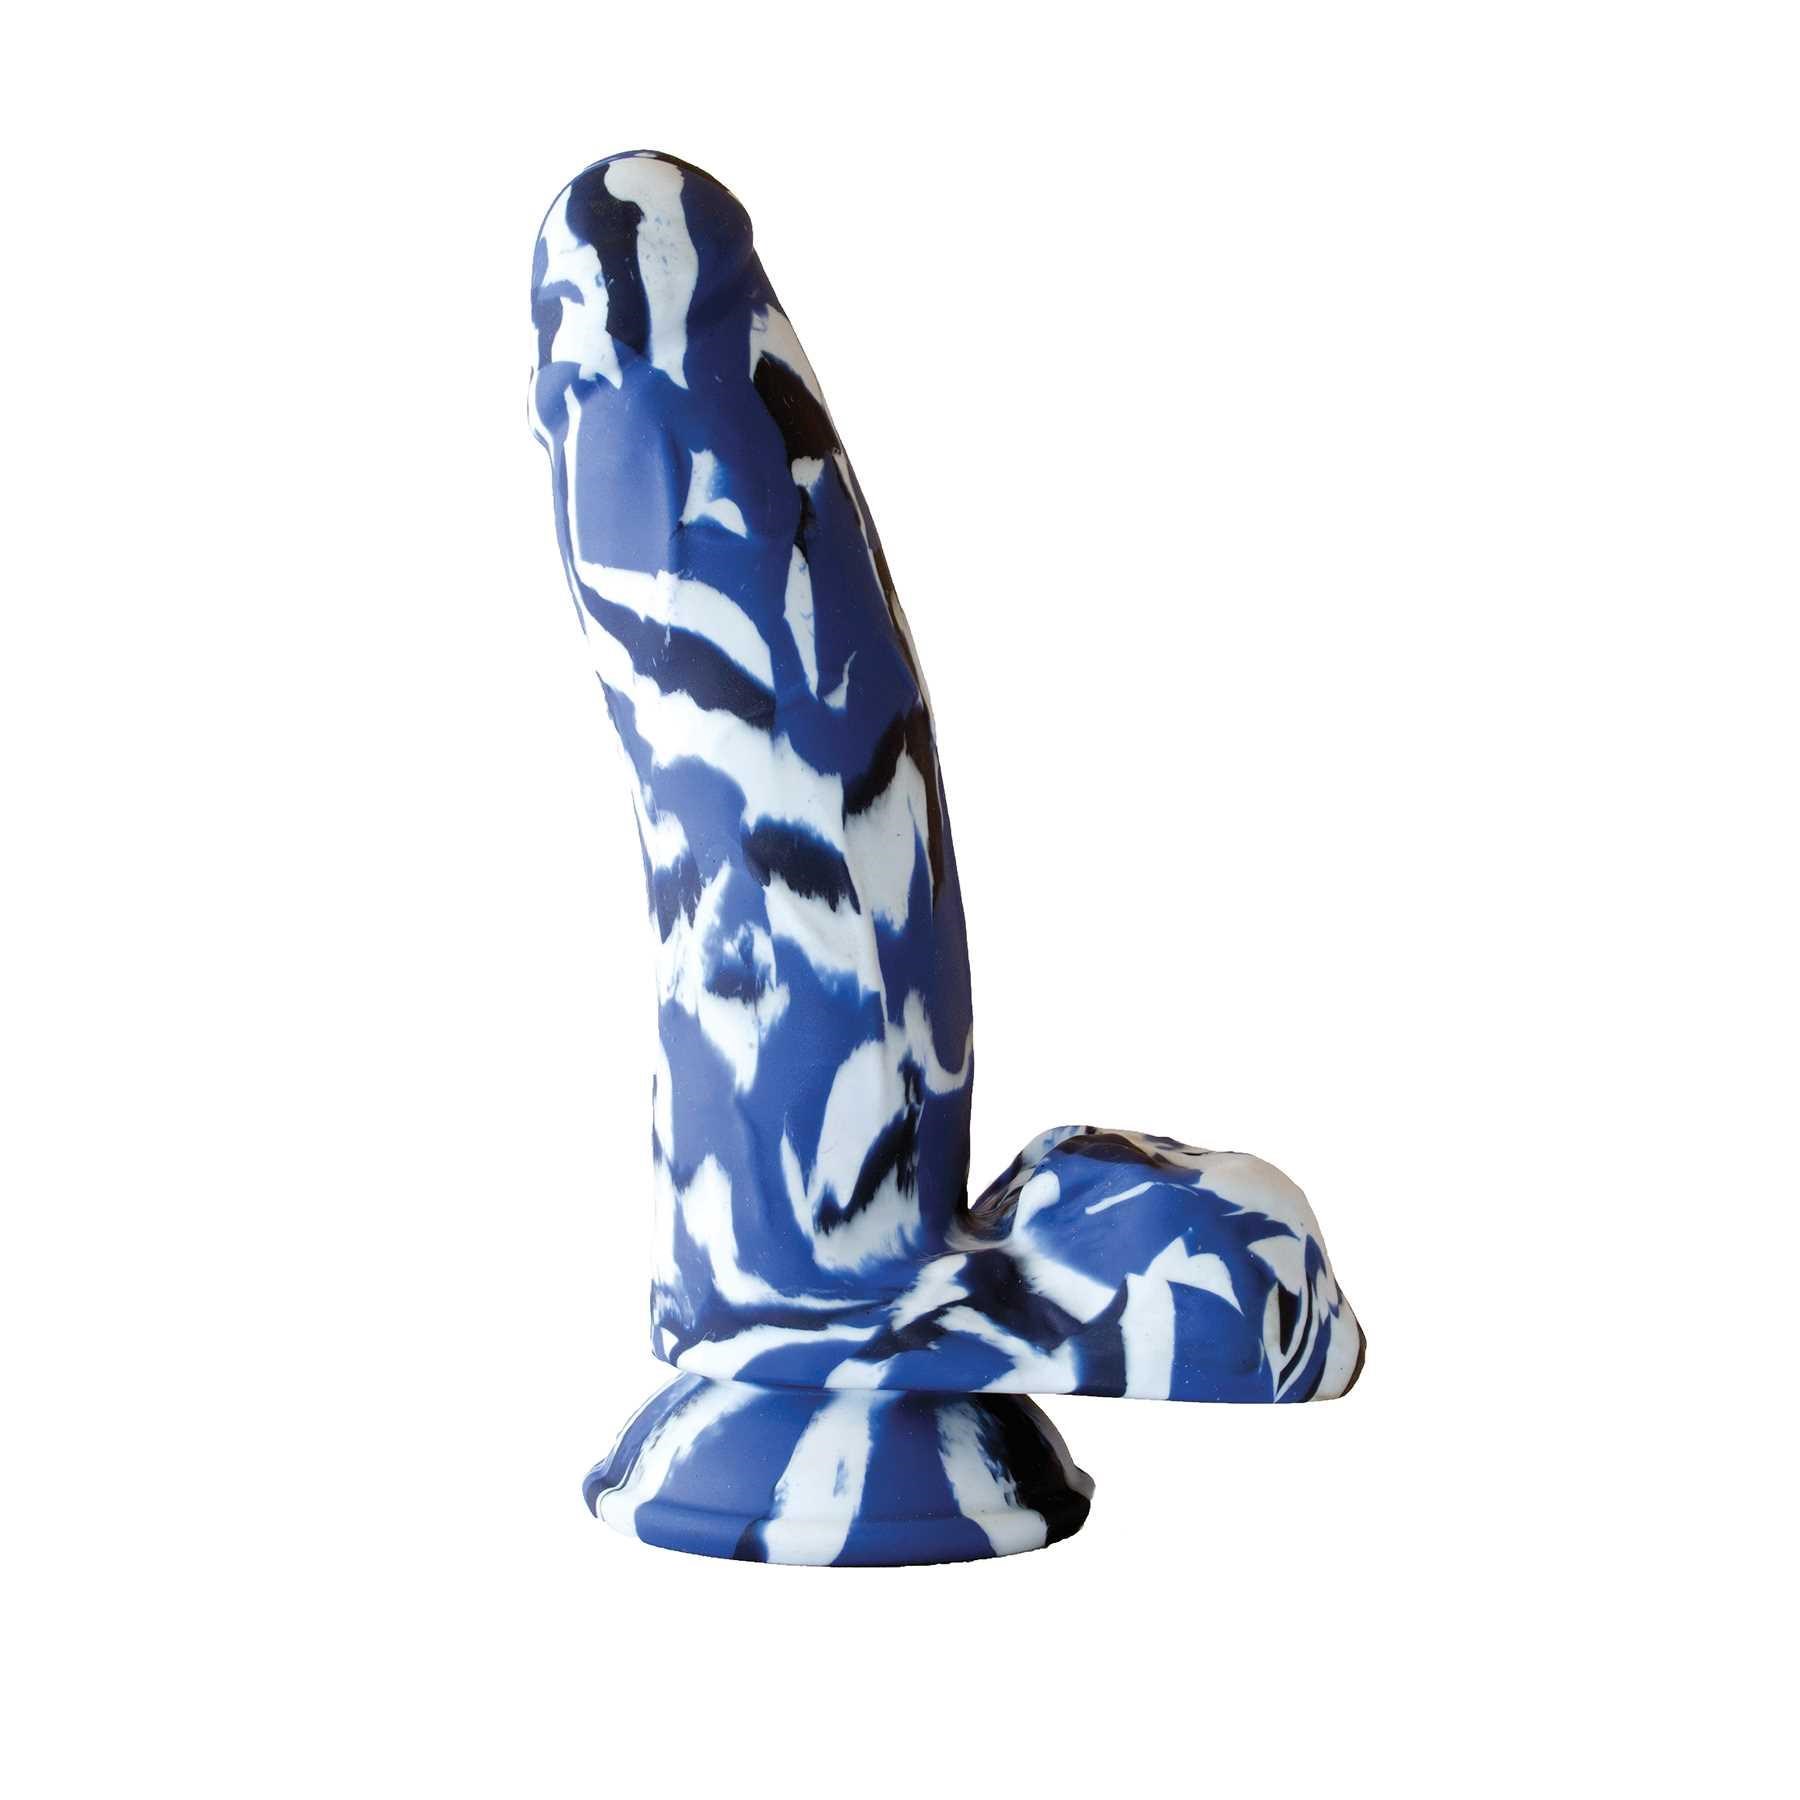  Major Dick Commando 7.25 Inch Thick Dong blue